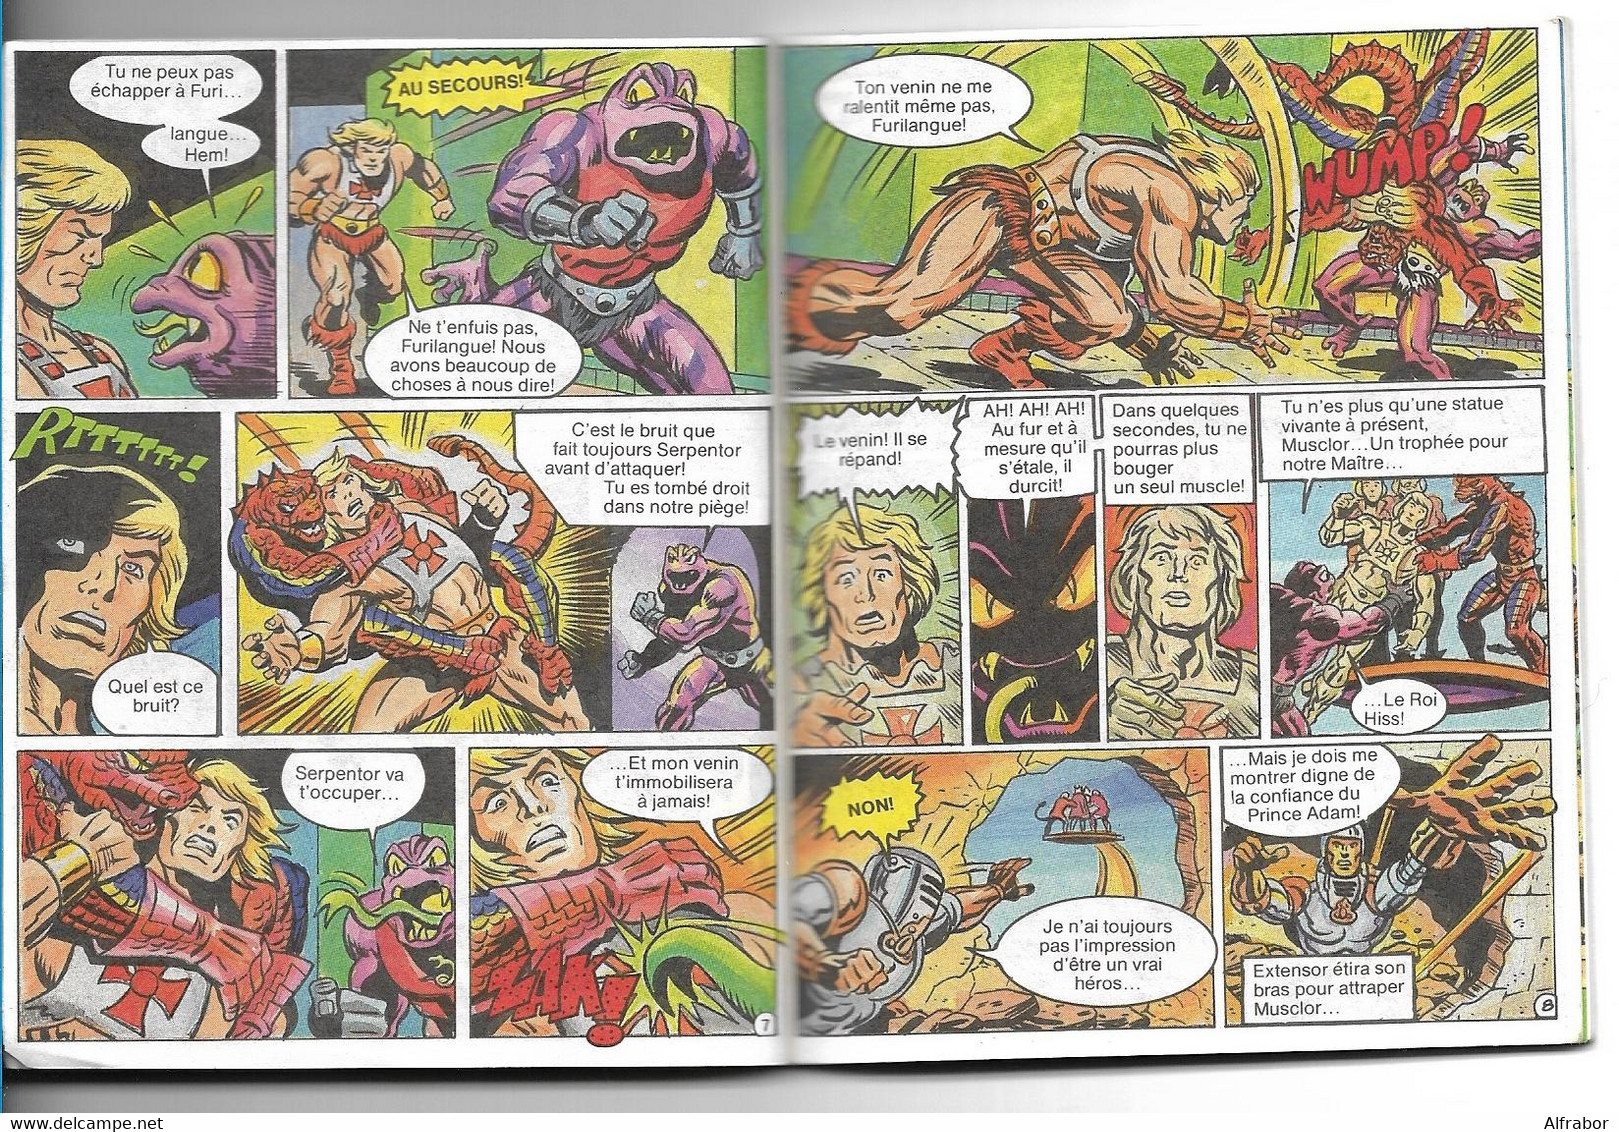 MASTERS OF THE UNIVERSE - COMICS BOOK 1985- LES SERPENTS ATTAQUENT /SNAKE ATTACK / SCHLANGENBRUT /L'ATTACO DEI SERPENTI- - Masters Of The Universe